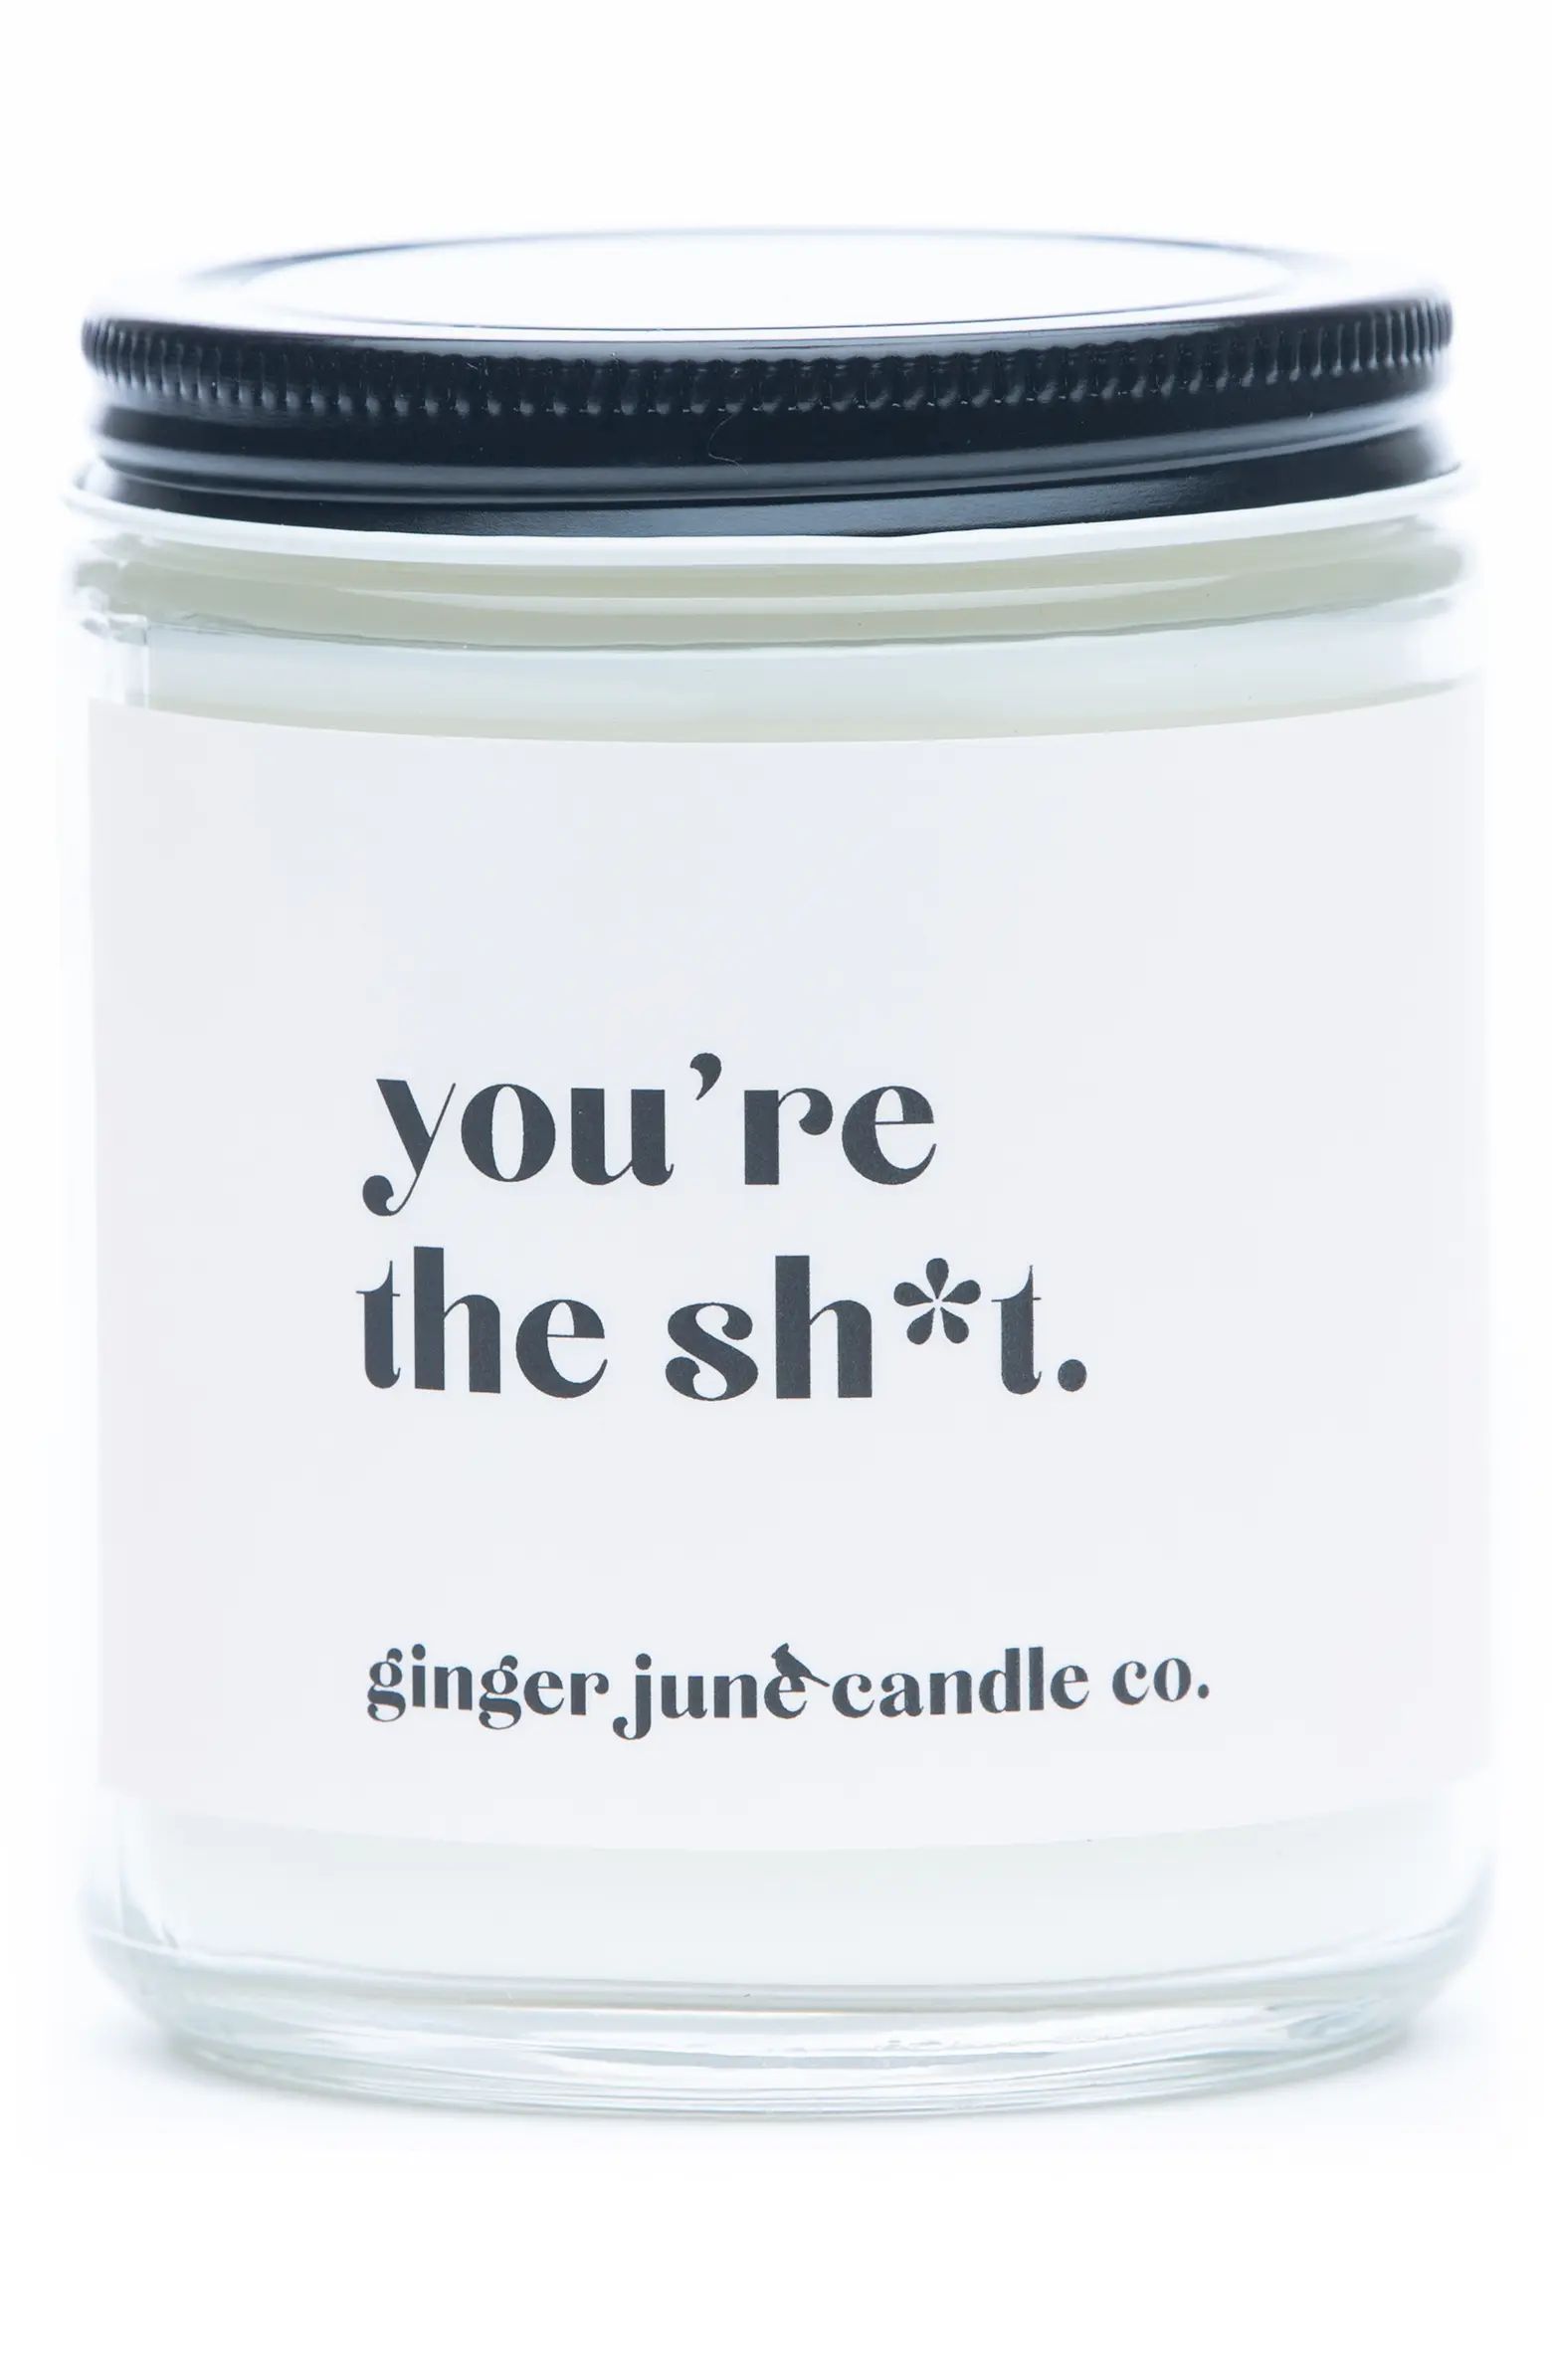 Ginger June Candle Co. Ginger June Candle Co You're the Sh*t Large Jar Candle | Nordstrom | Nordstrom